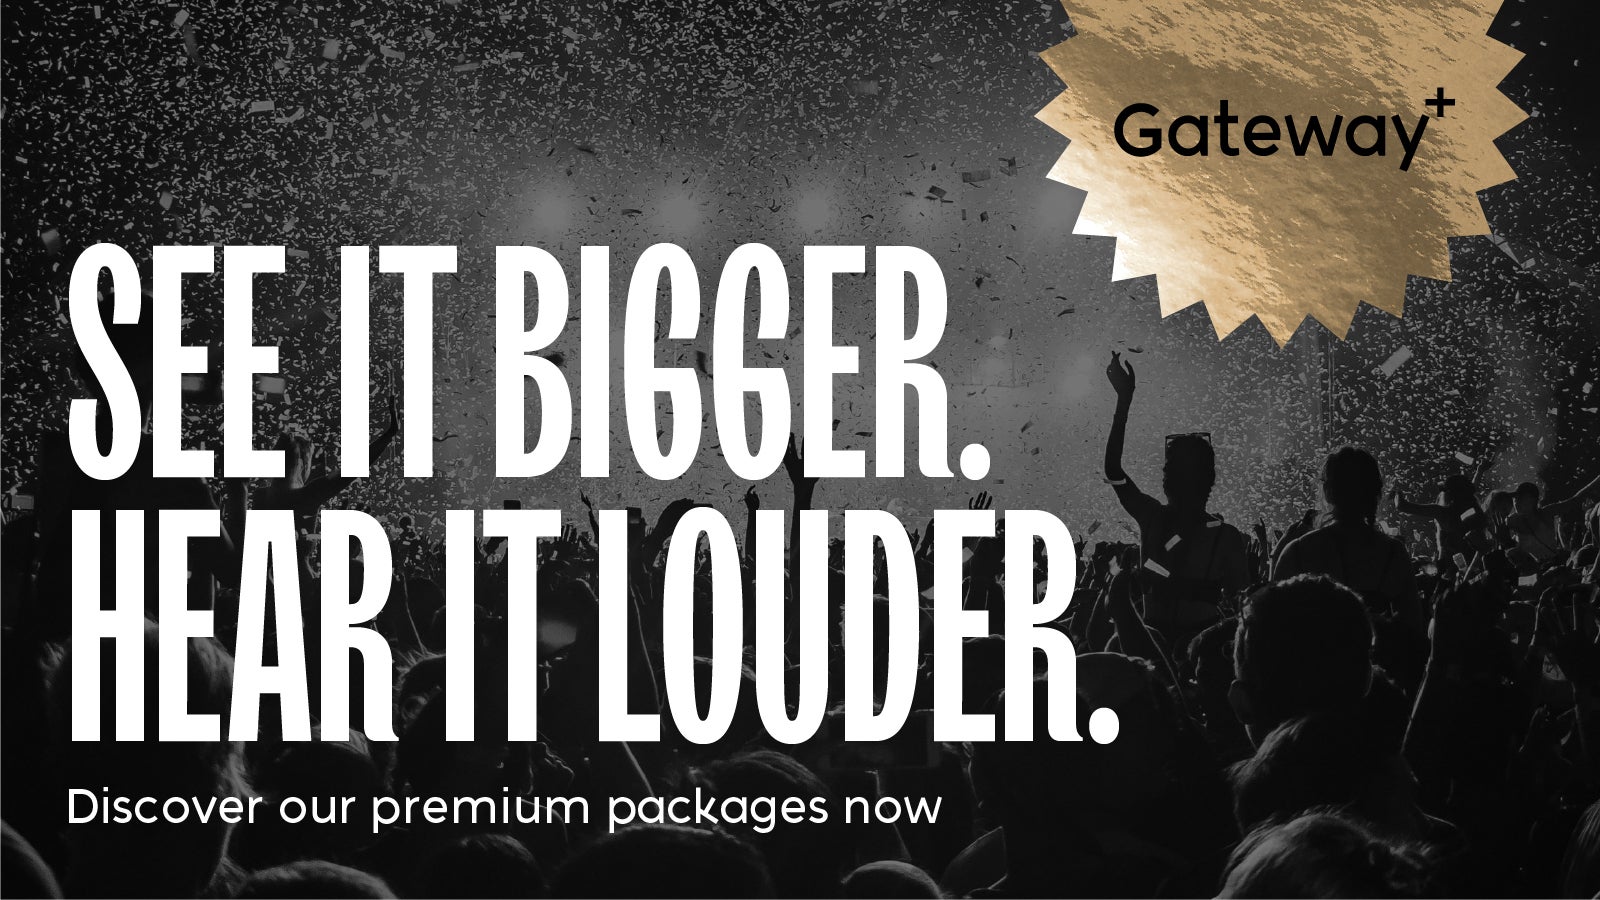 Rhod Gilbert - Premium Package - Gateway+ Event Title Pic